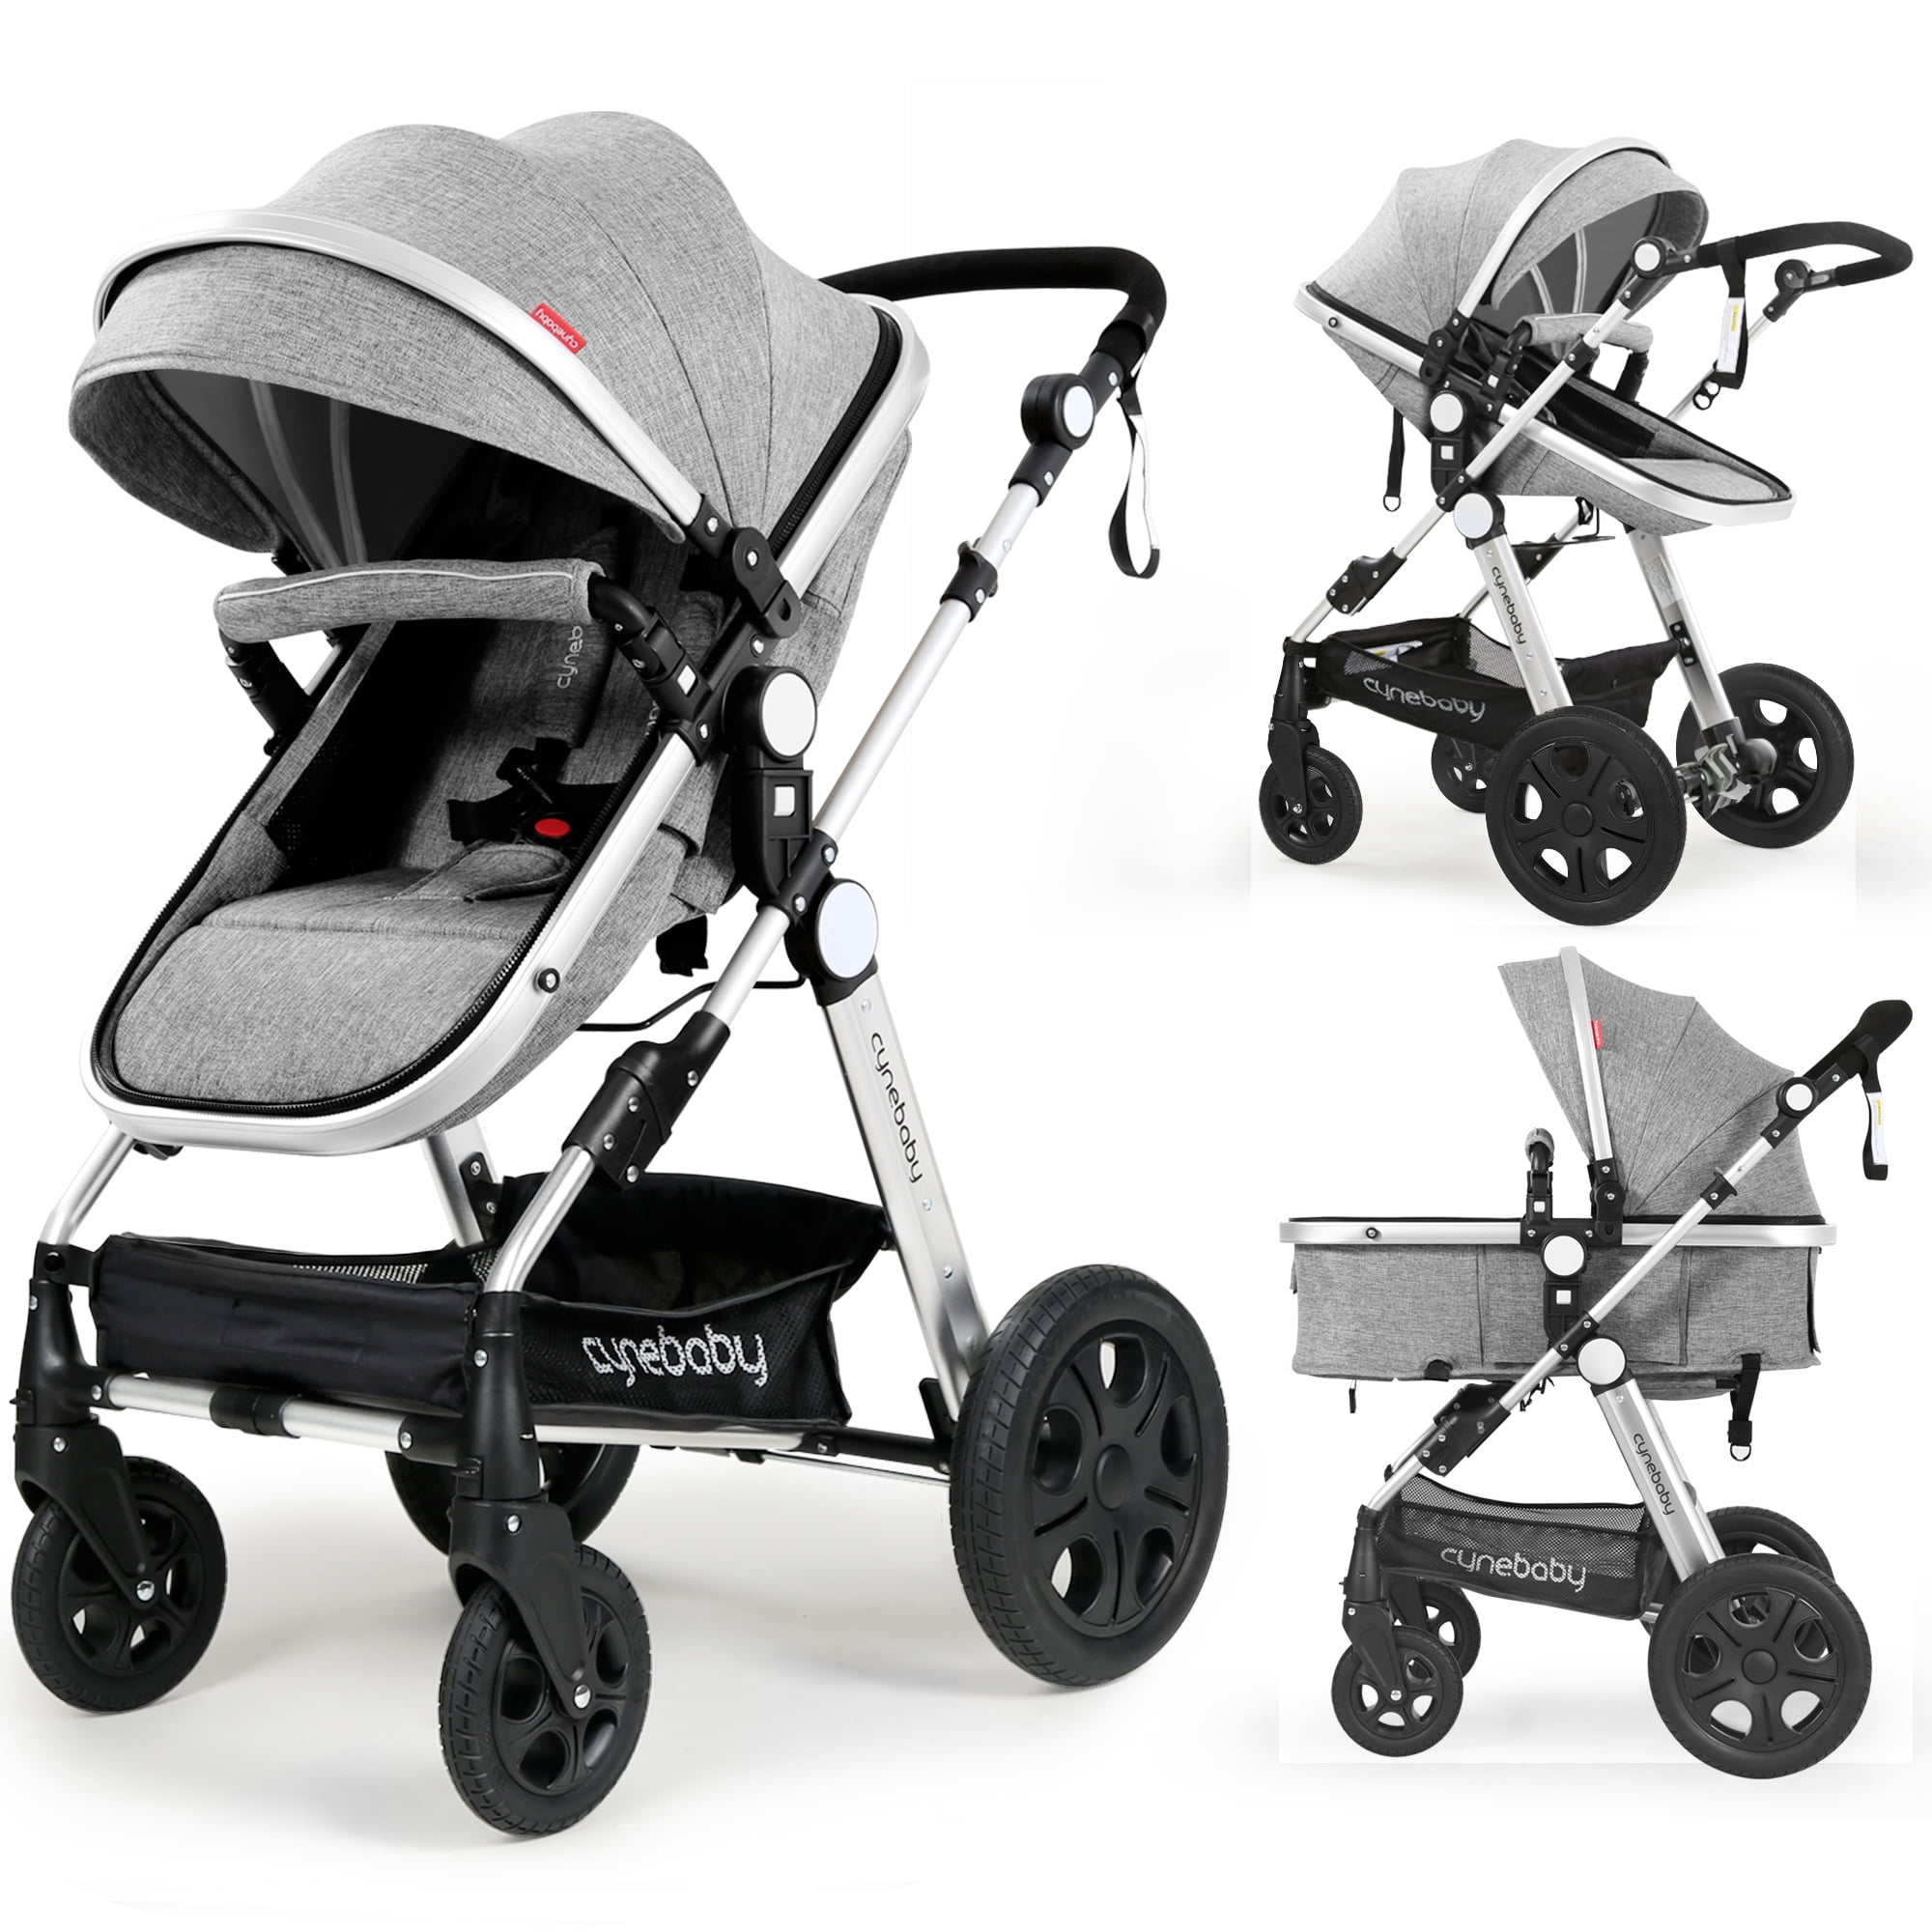 Cynebaby Convertible Baby Stroller with Universal Wheel